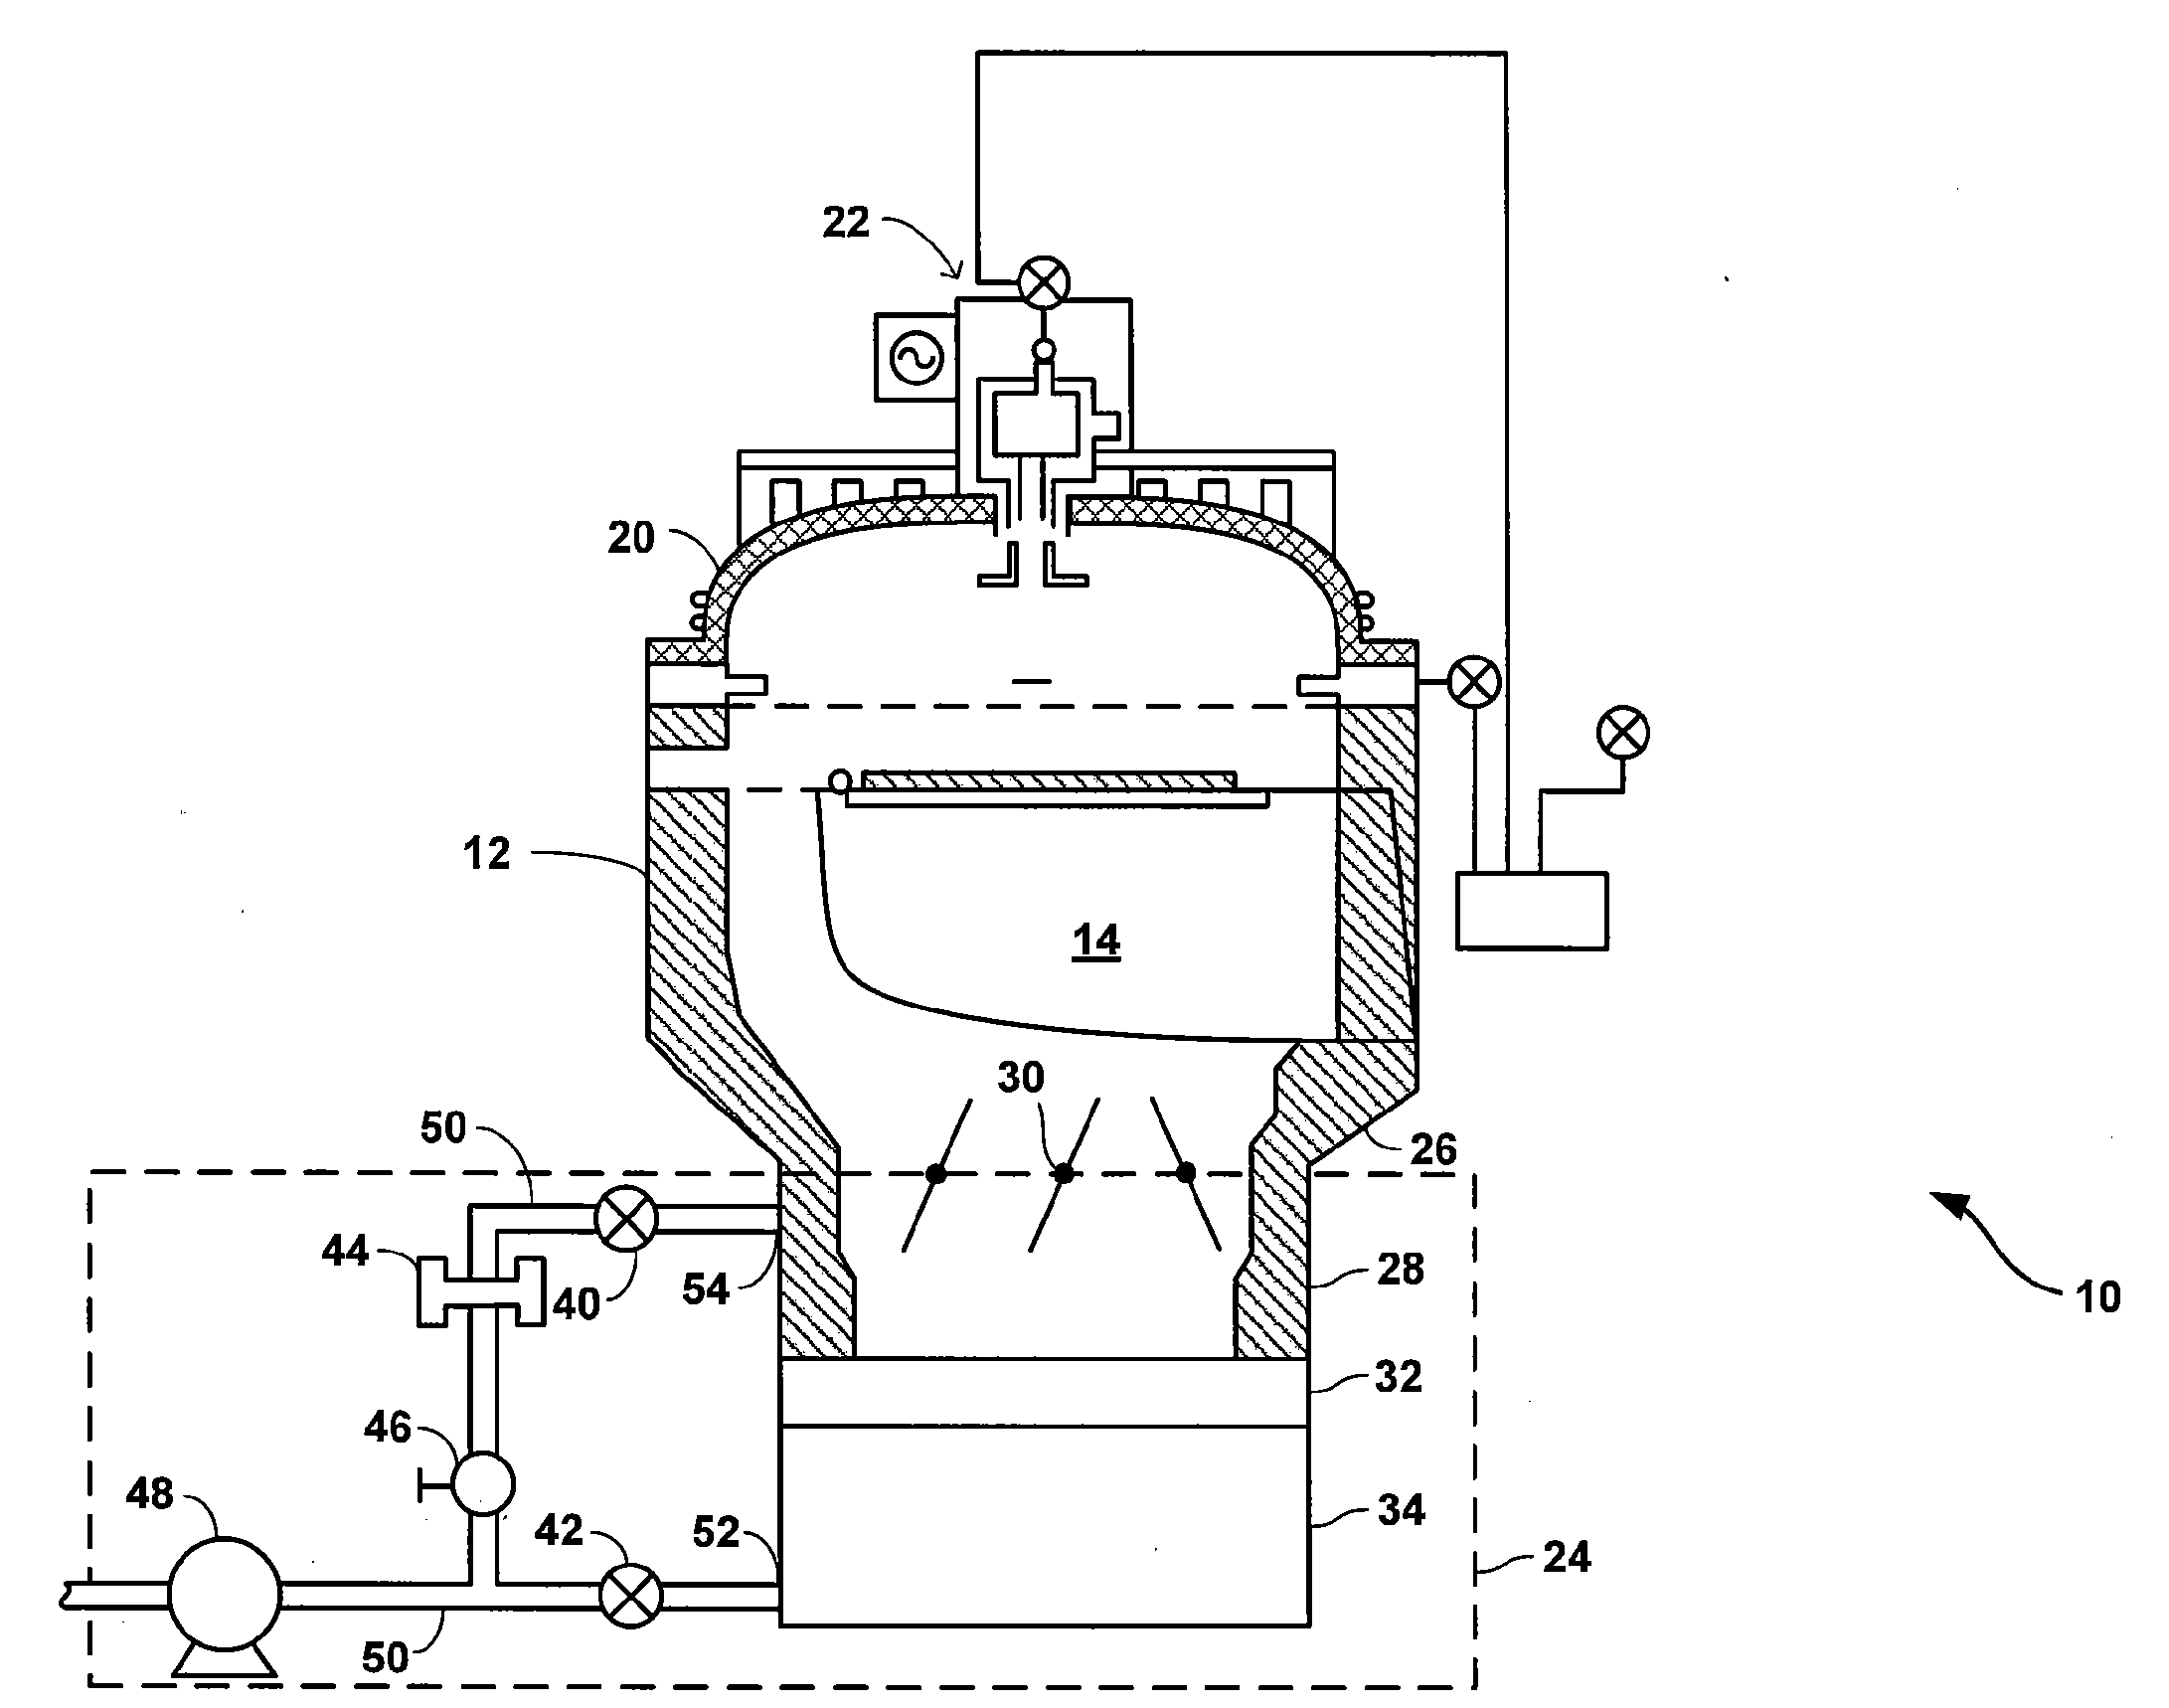 Multi-port pumping system for substrate processing chambers